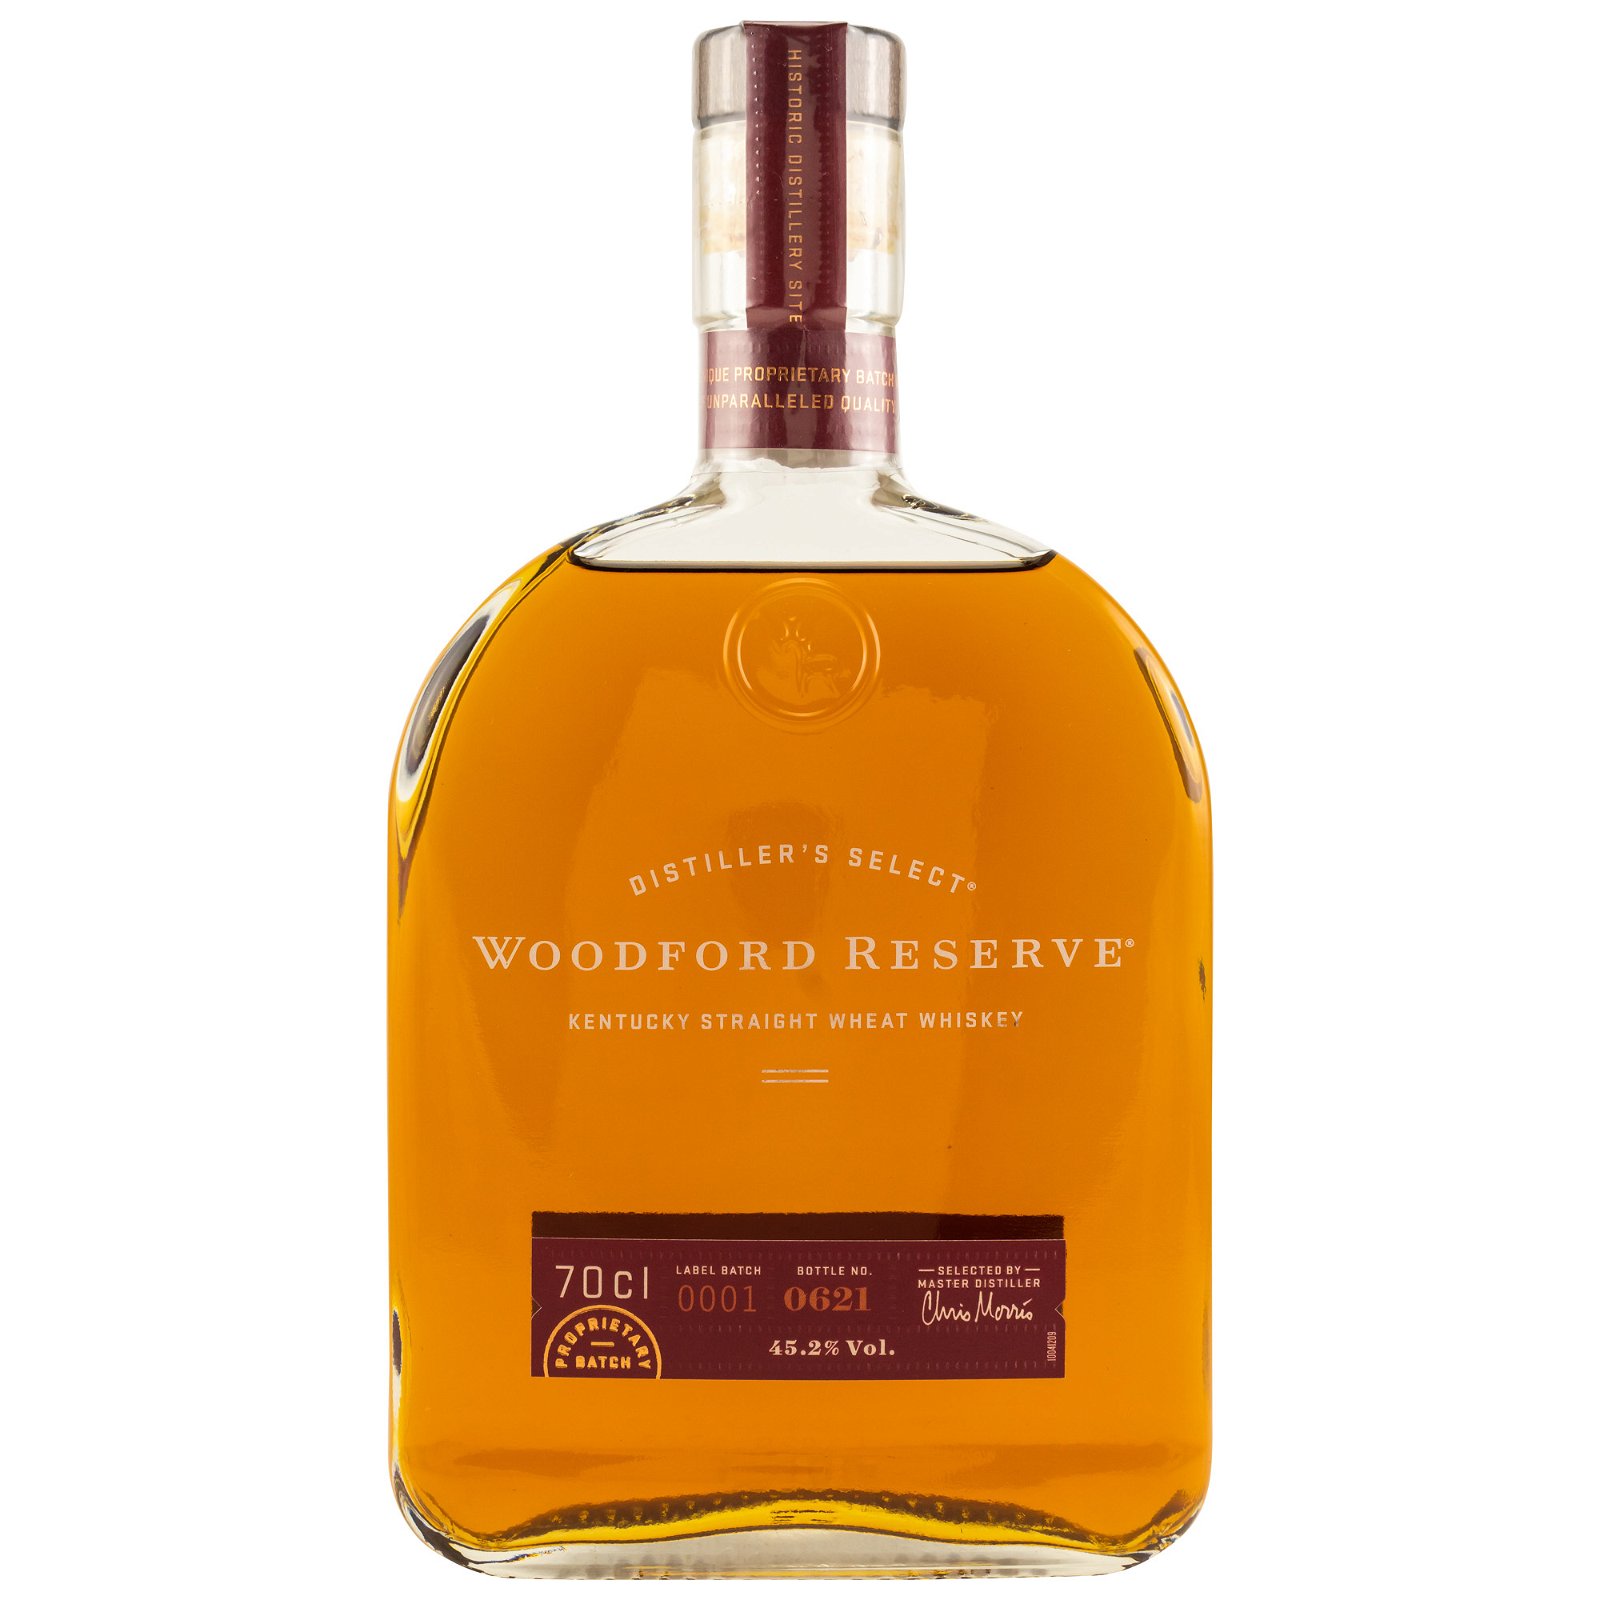 Woodford Reserve Kentucky Straight Wheat Whiskey Distillers Select 